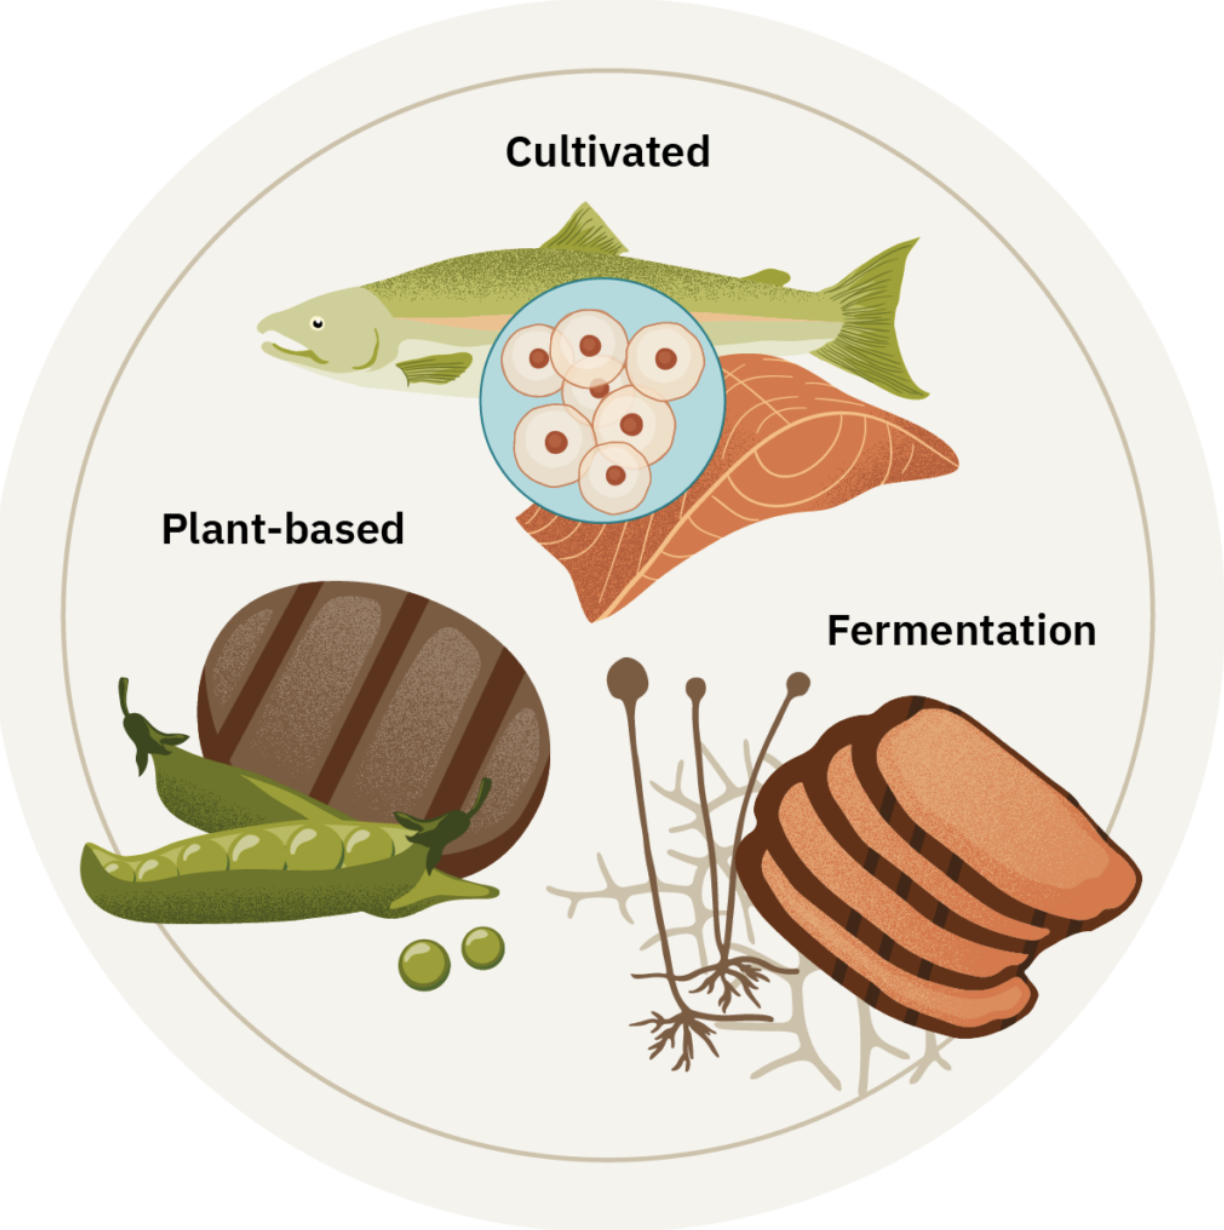 graphic containing icons representing cultivated, fermented, and plant-based alternative protein sources